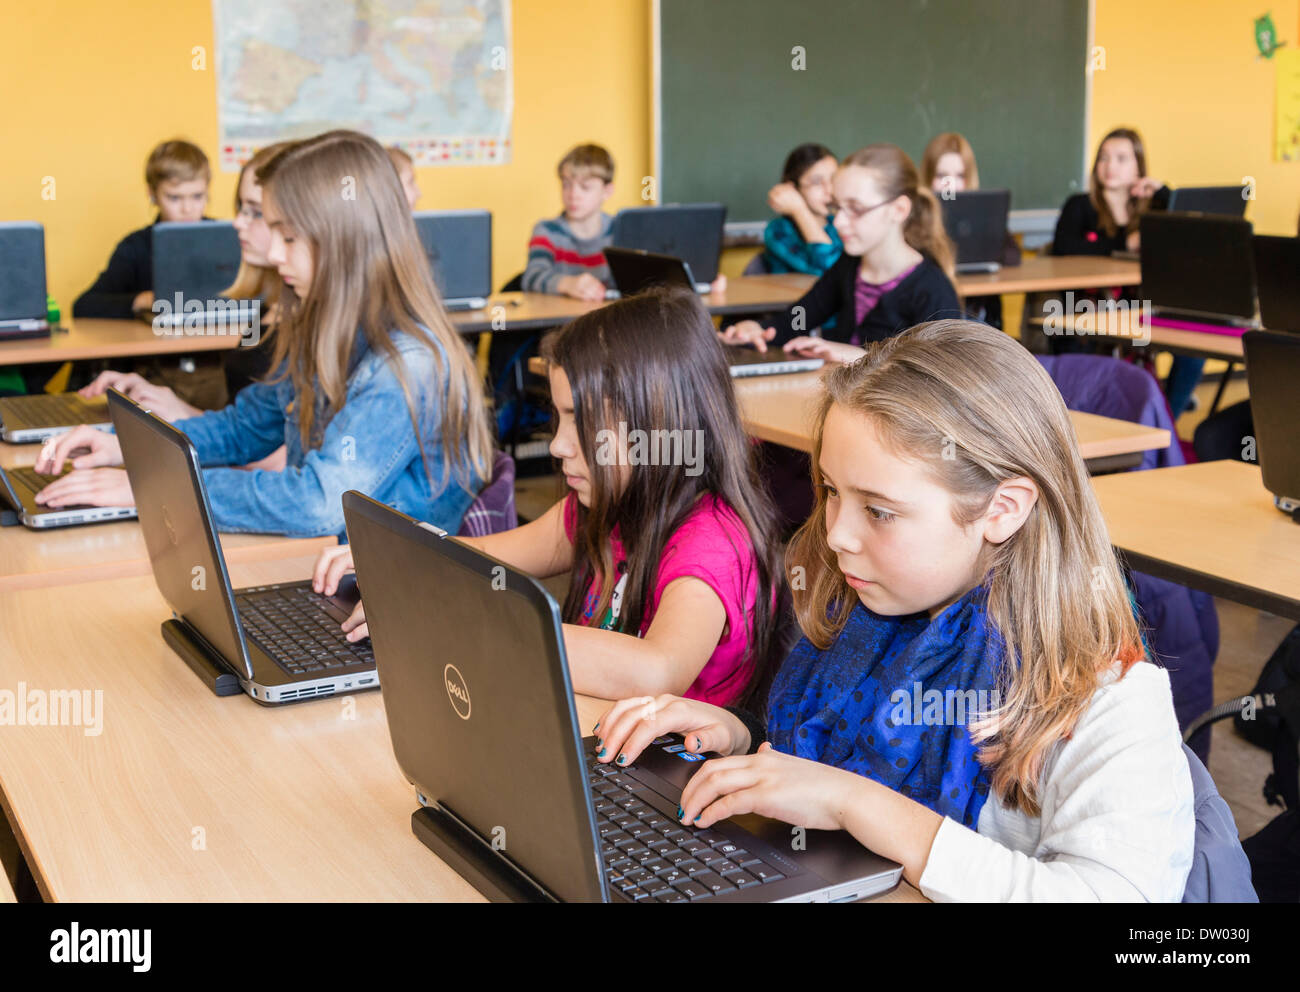 Junior high school students (about 12 years old) work with their laptops in their classroom. Stock Photo